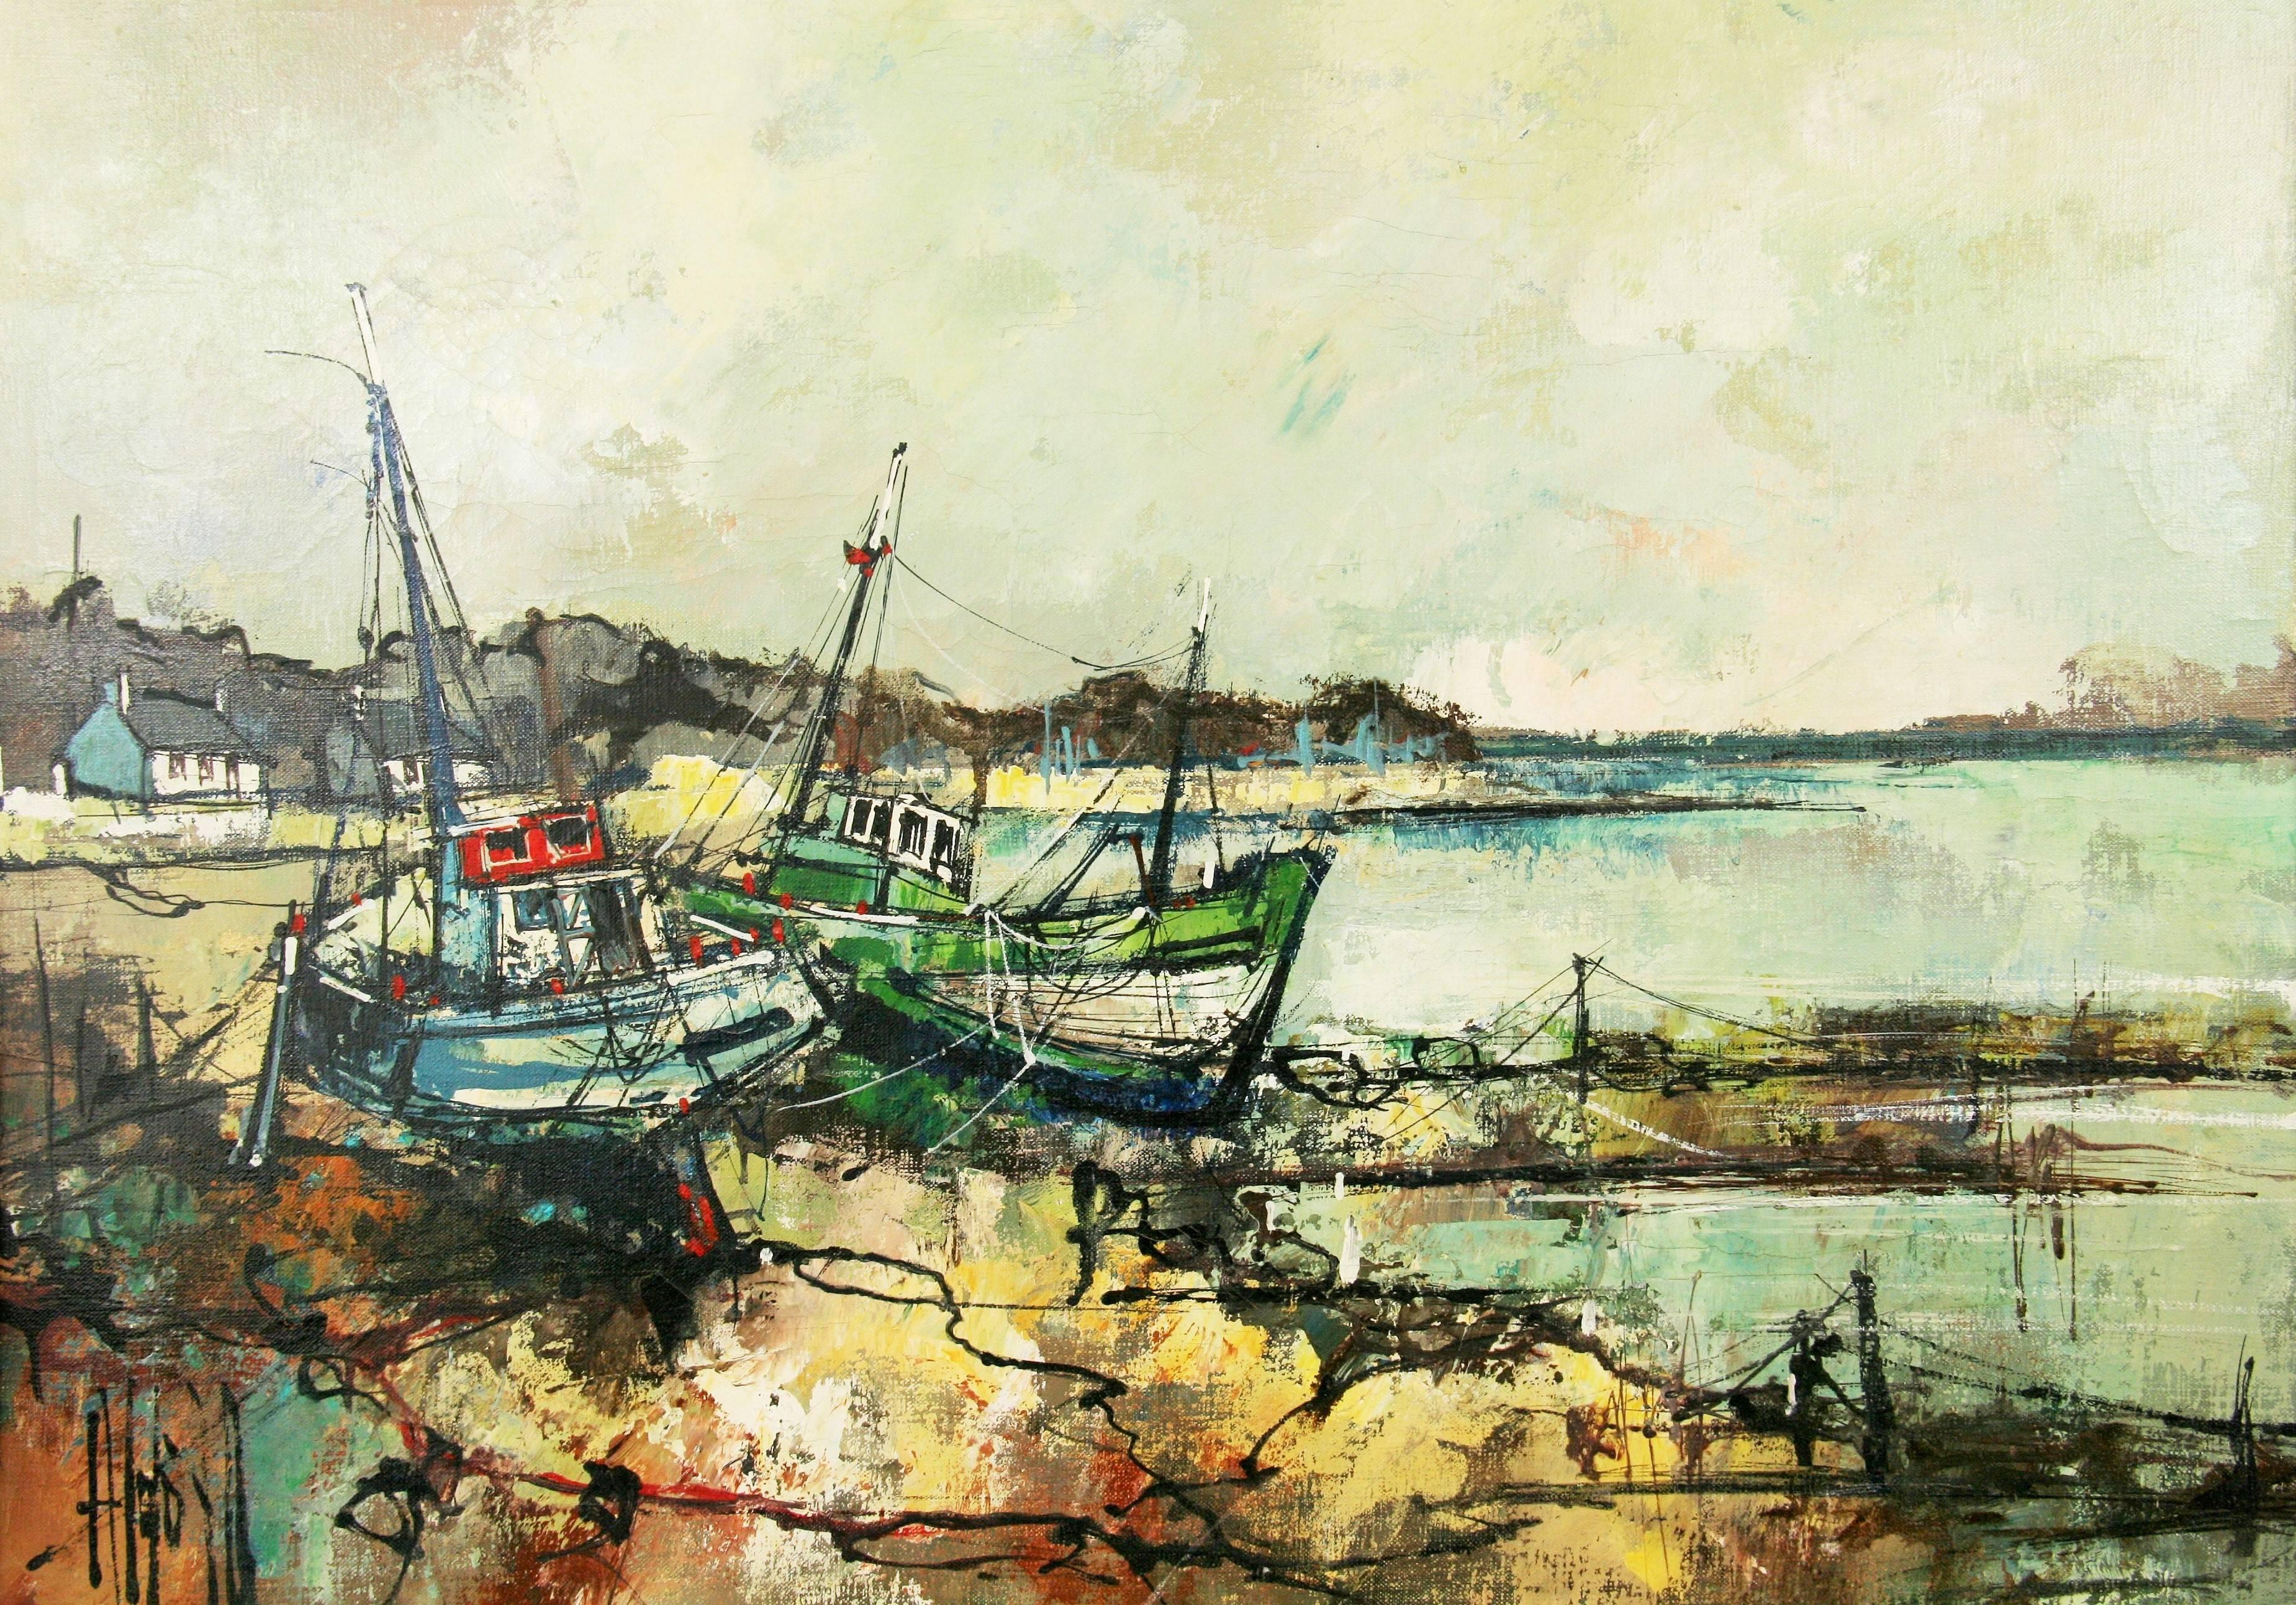   Seascape by A.Luongo - Painting by Aldo Luongo